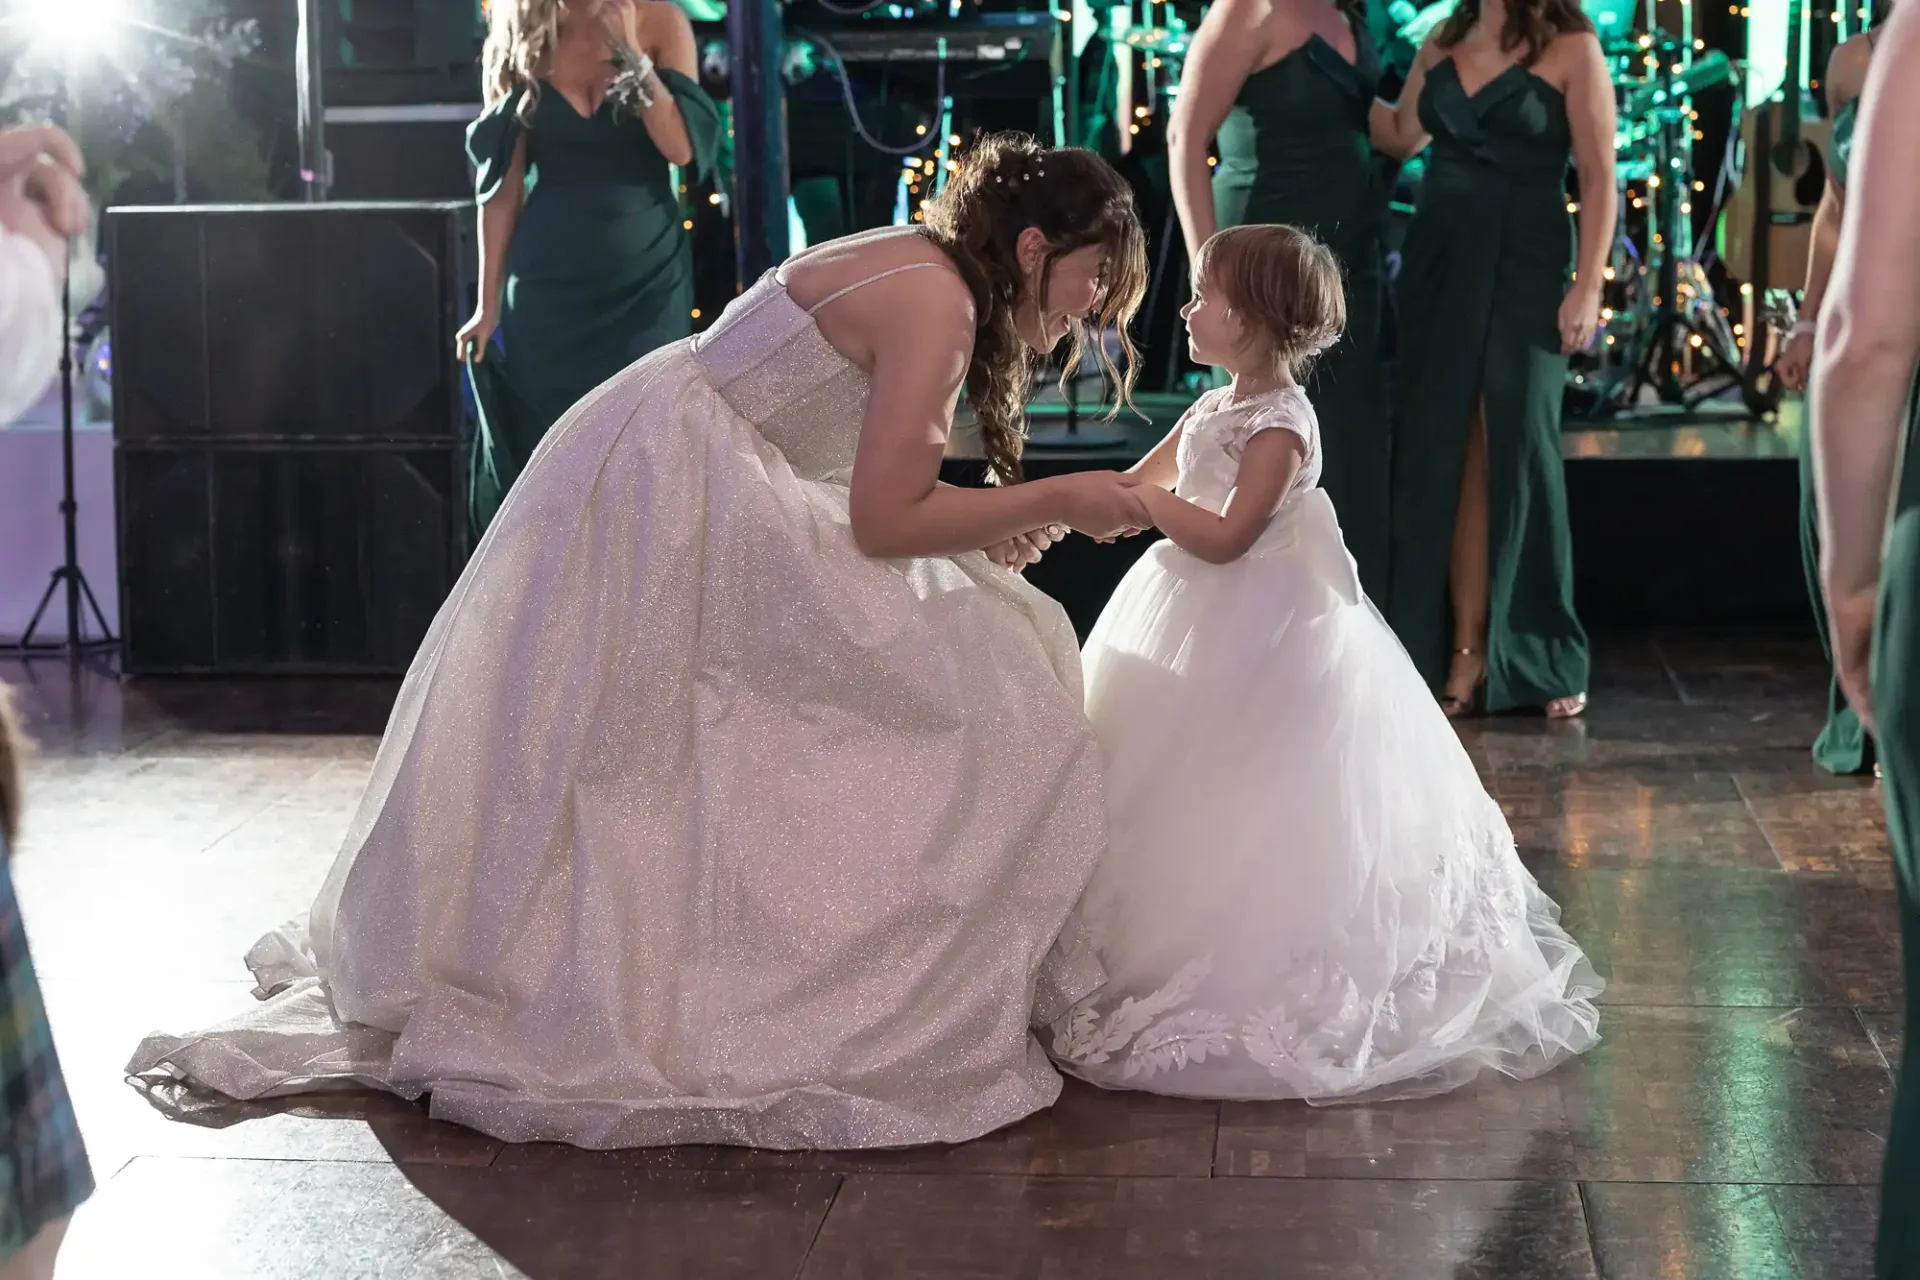 A woman in a white gown bends down to hold hands with a young girl in a white dress on a dance floor, surrounded by people in green dresses. A band is performing in the background.